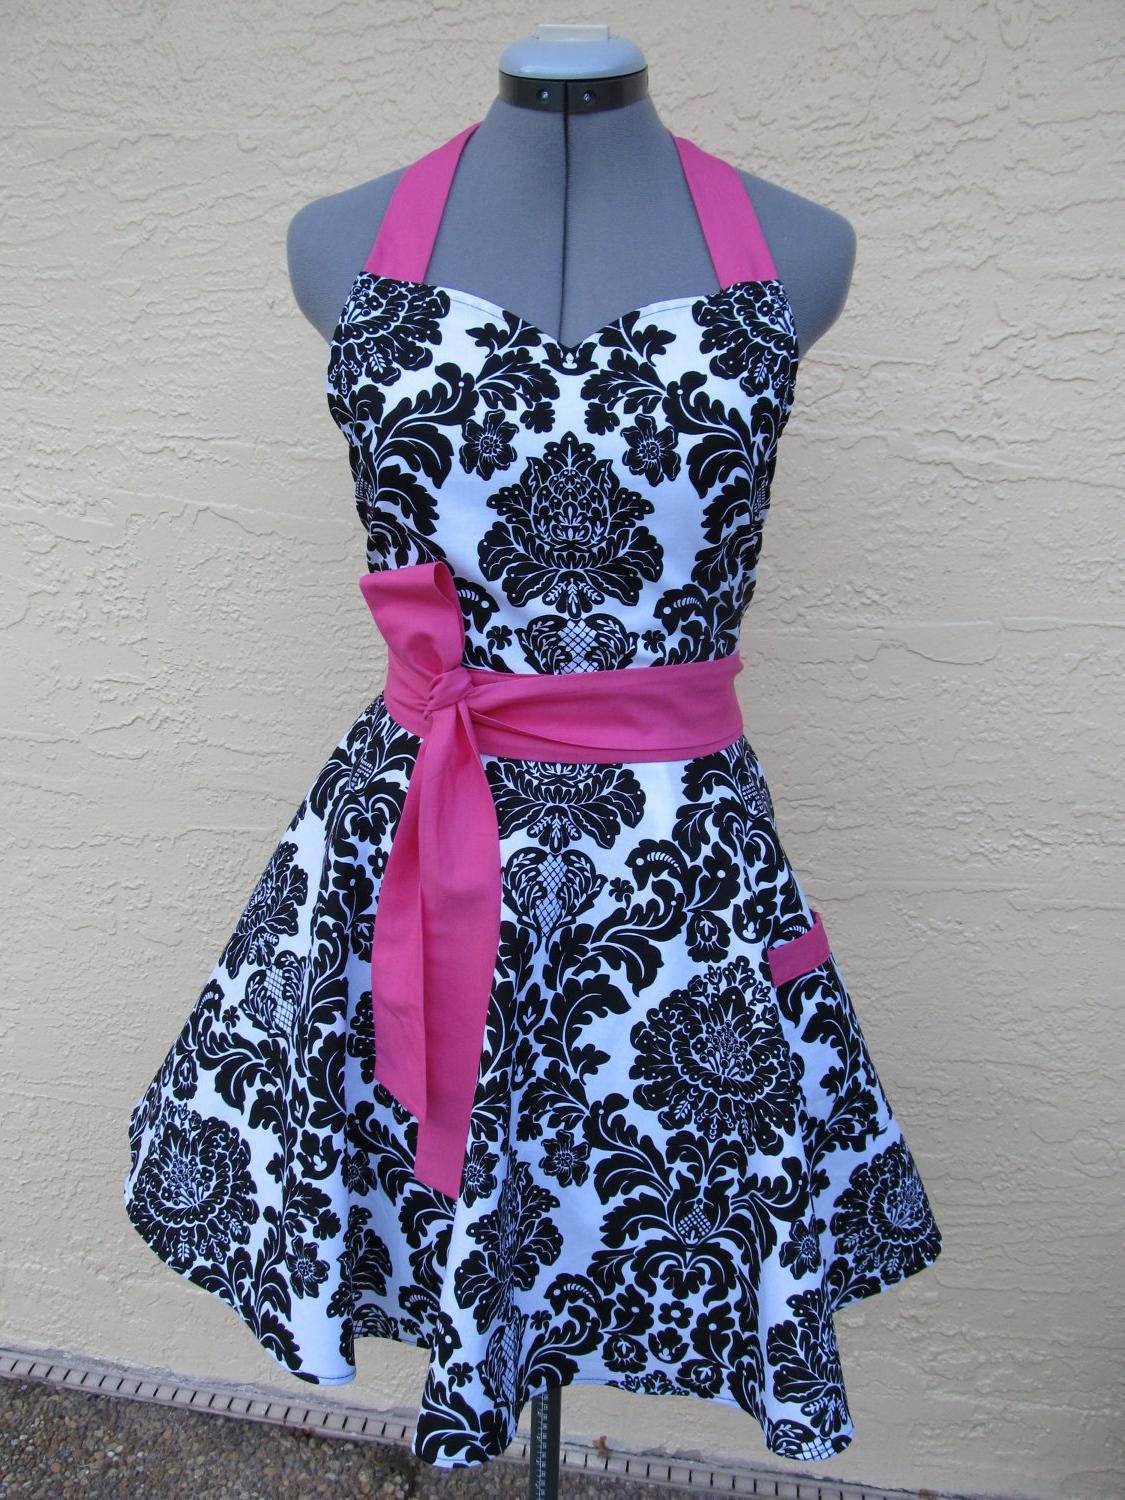 Black Damask with Hot Pink.